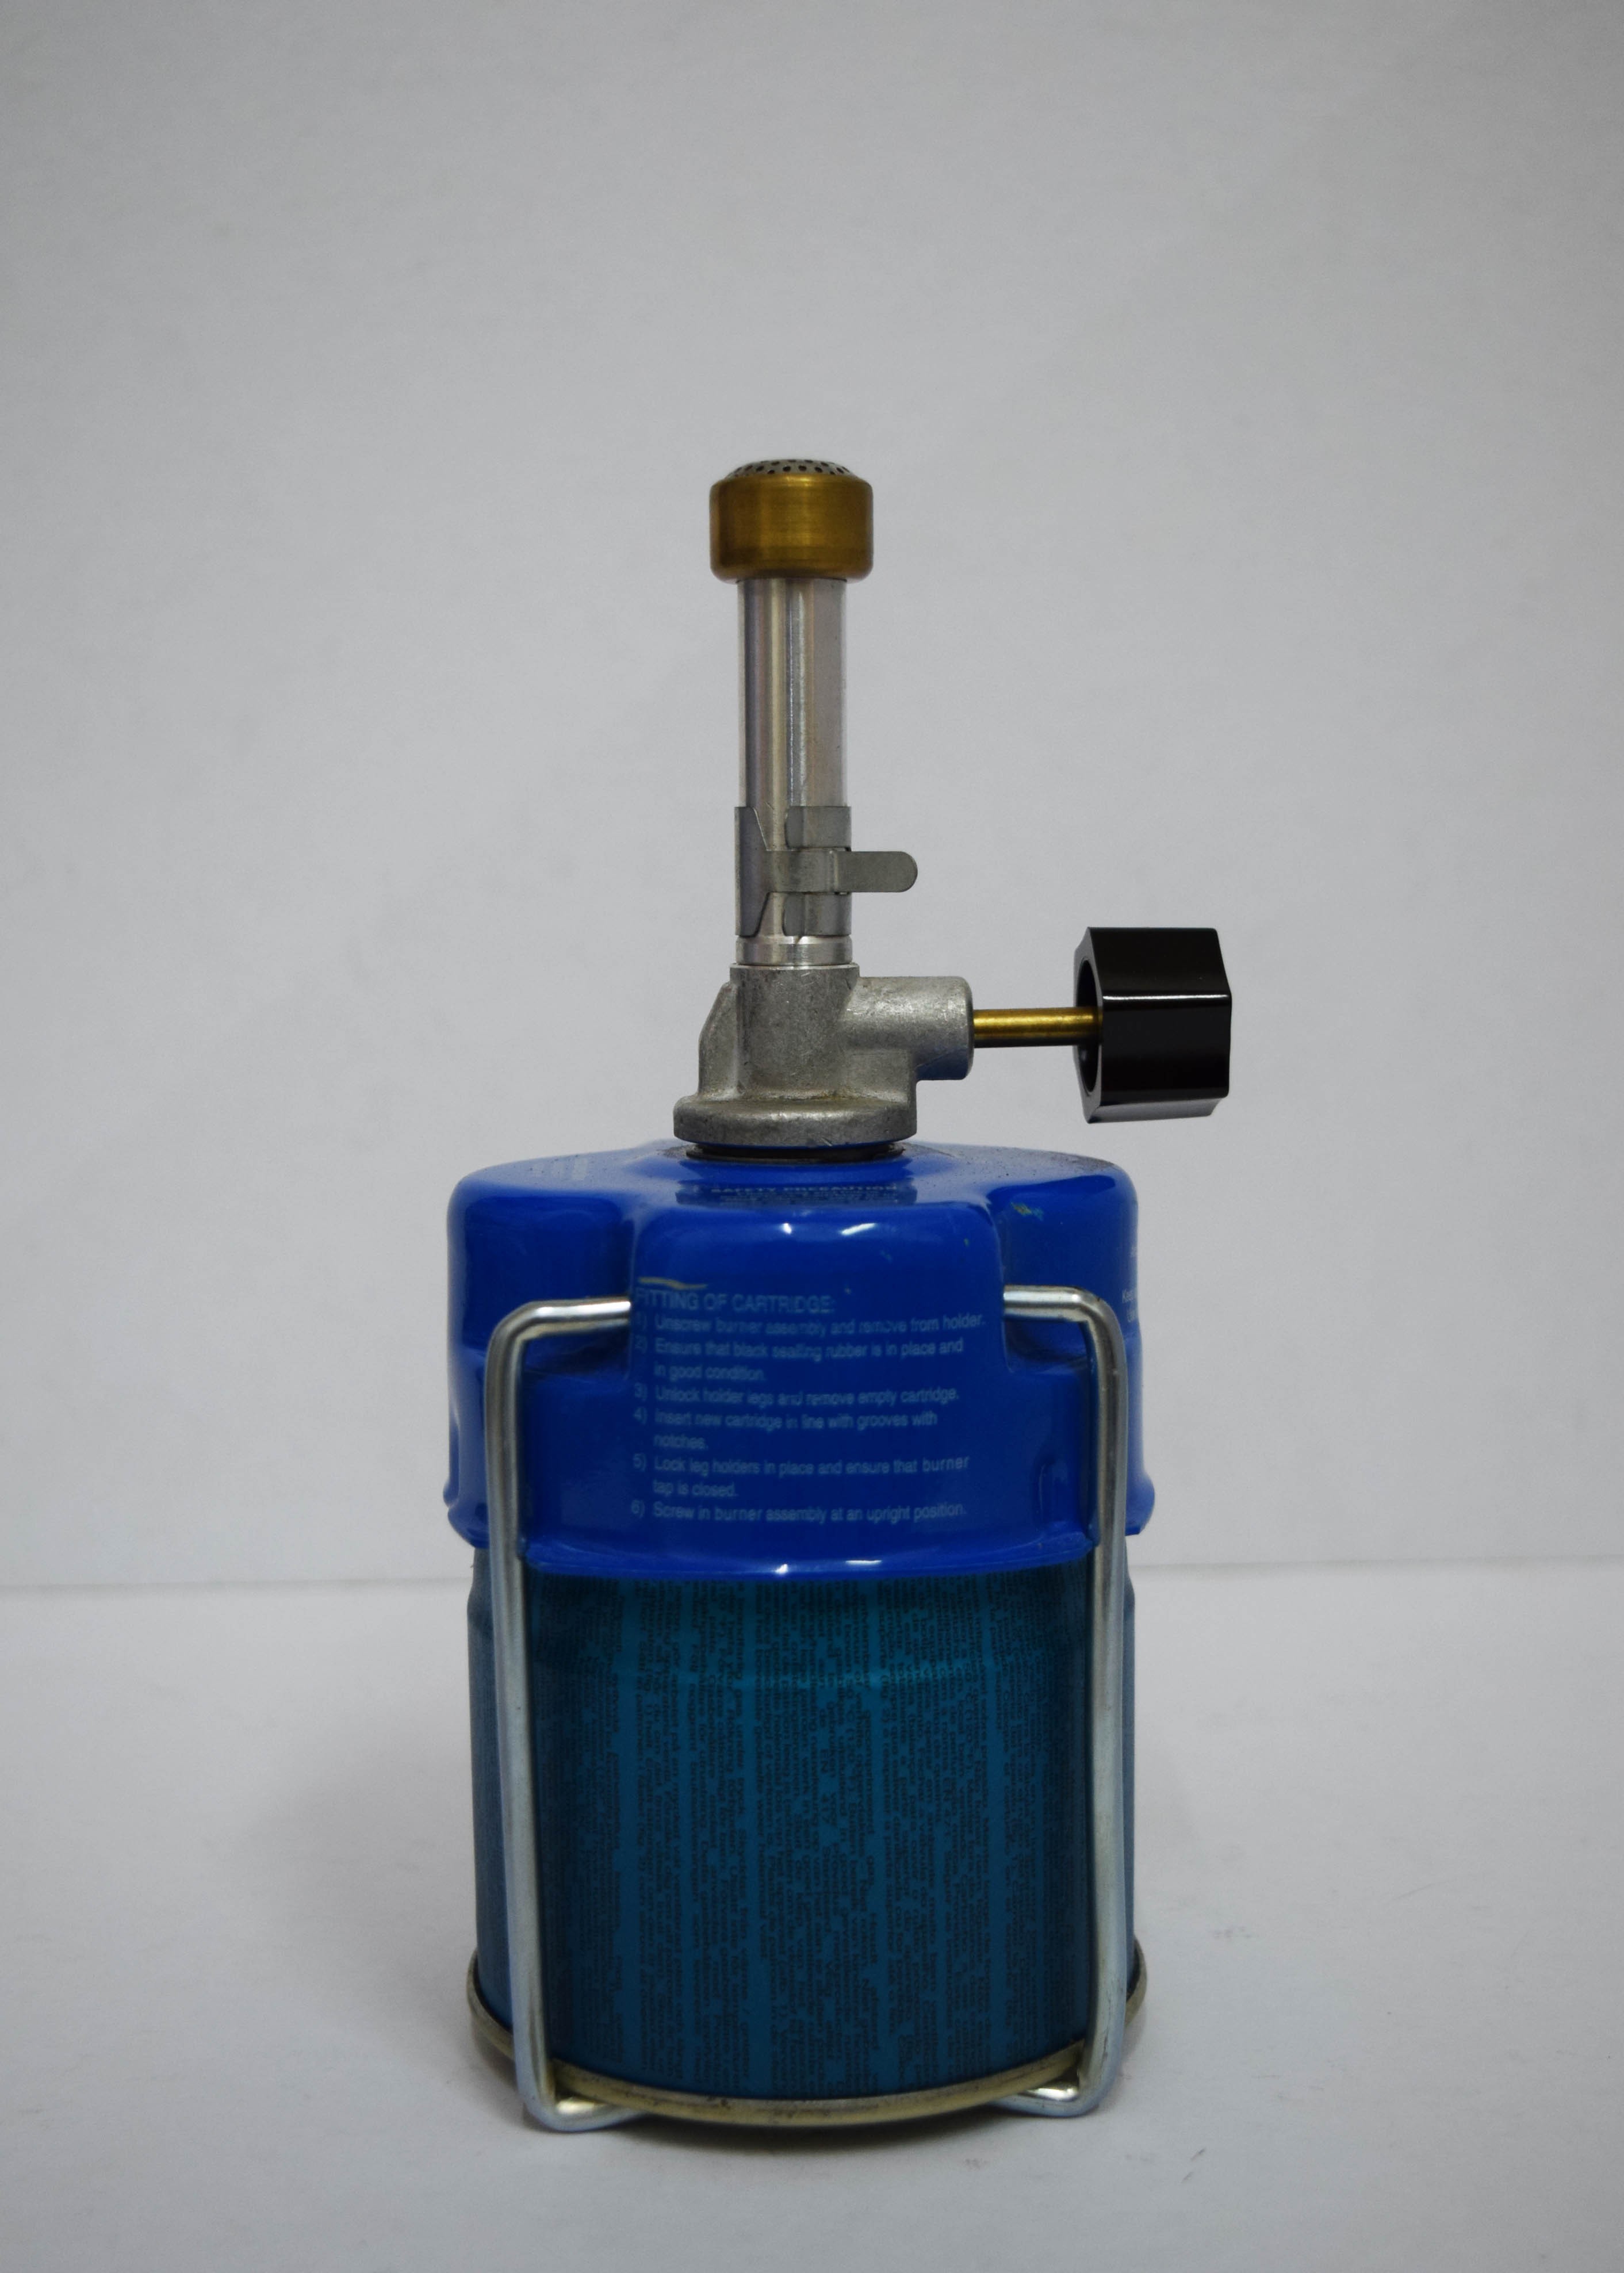 Portable Bunsen Burner with Gas Cartridge - Laboratory Accessories ...